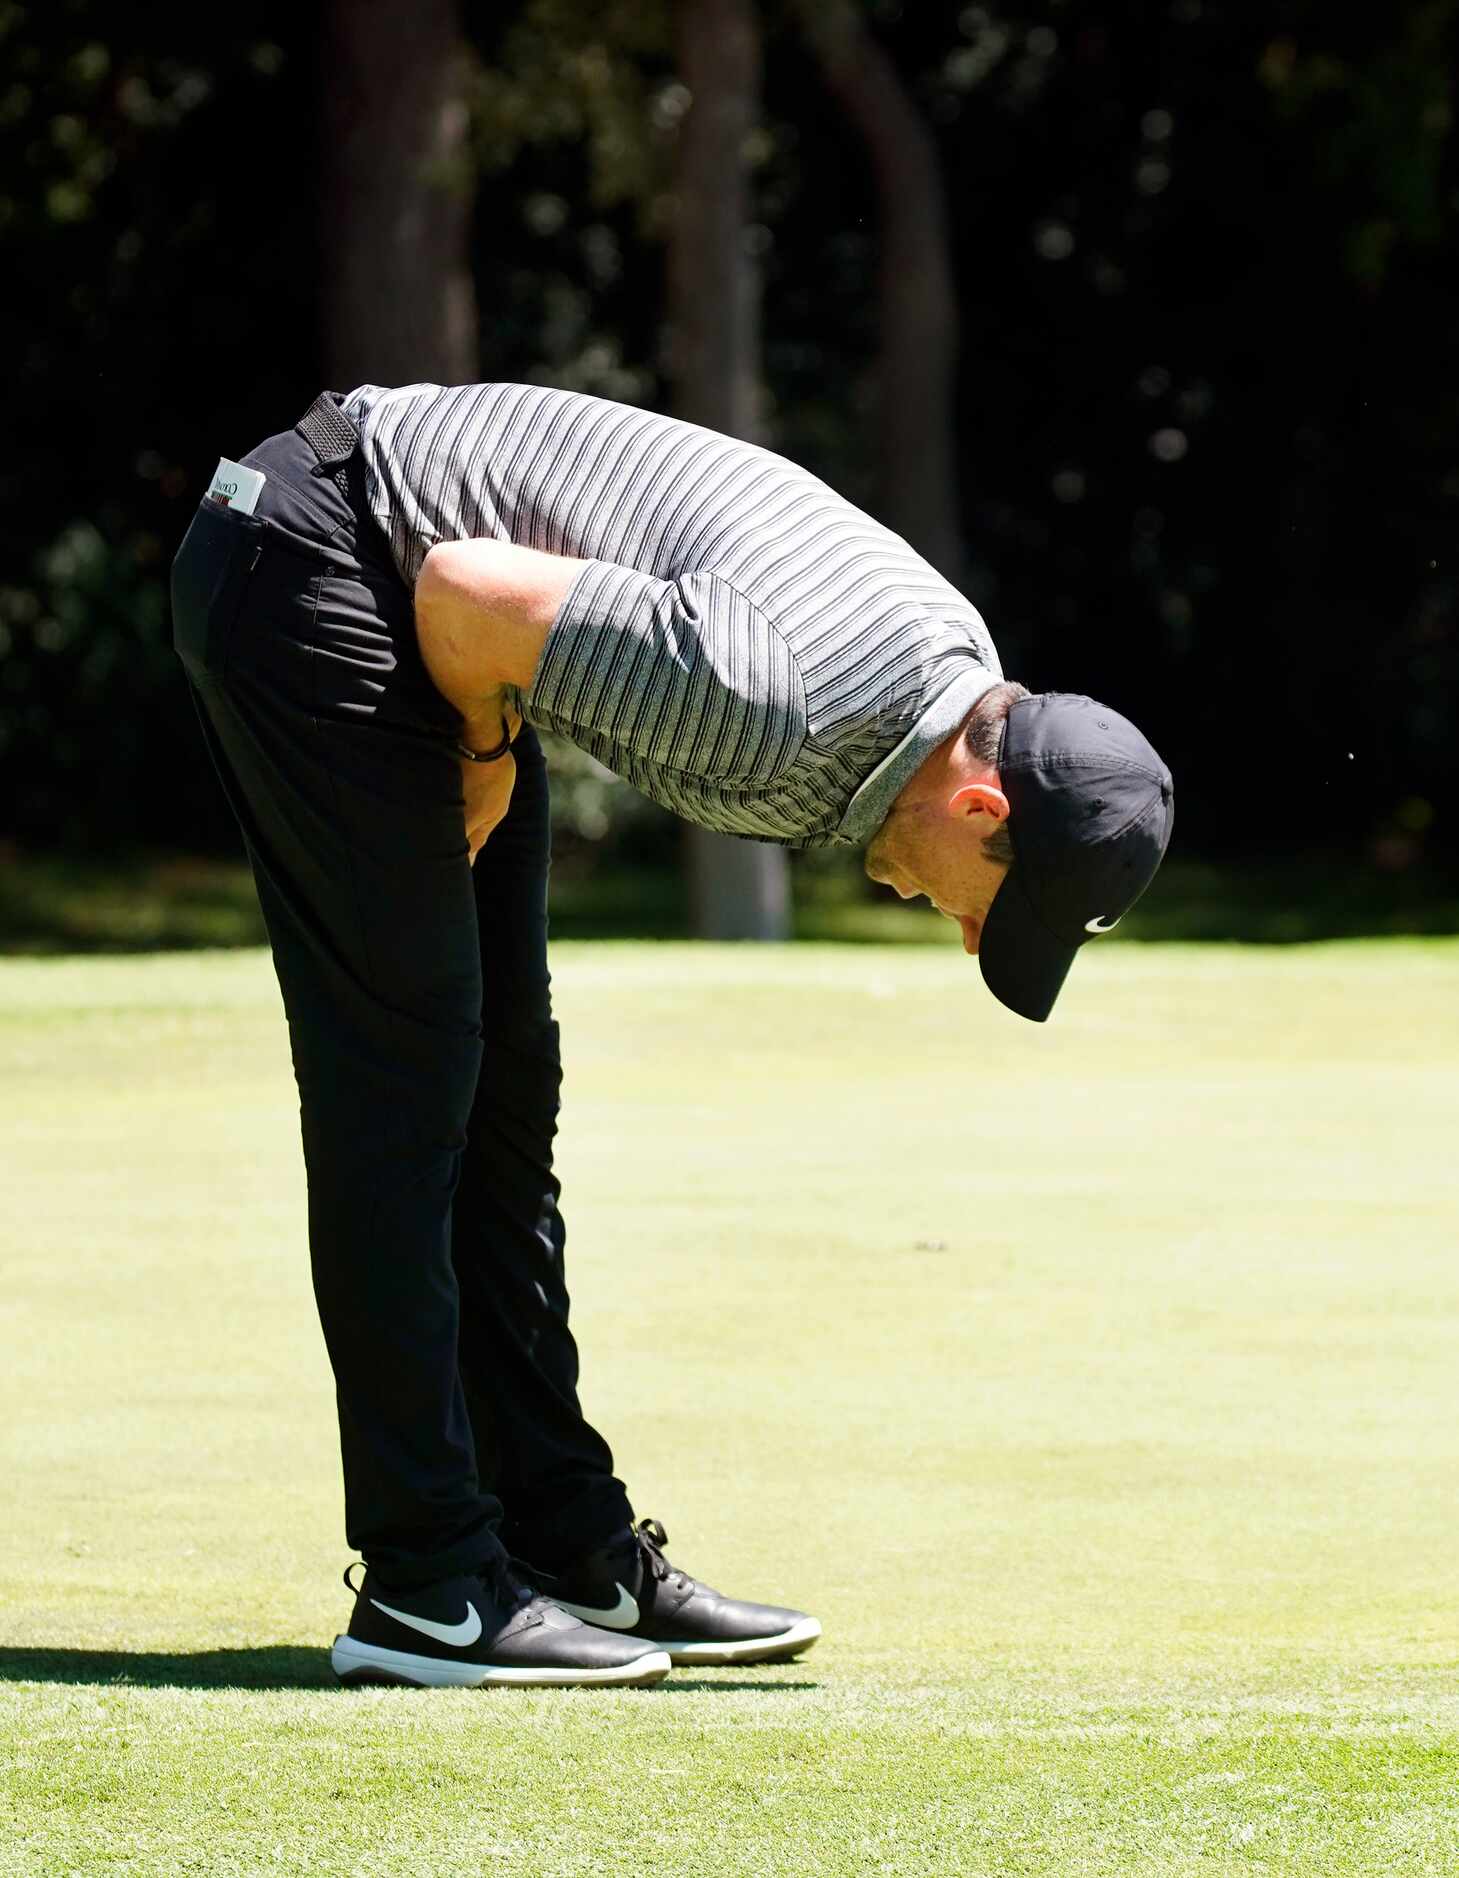 PGA Tour golfer Rory McIlroy reacts after missing a birdie putt on No. 8 during the second...